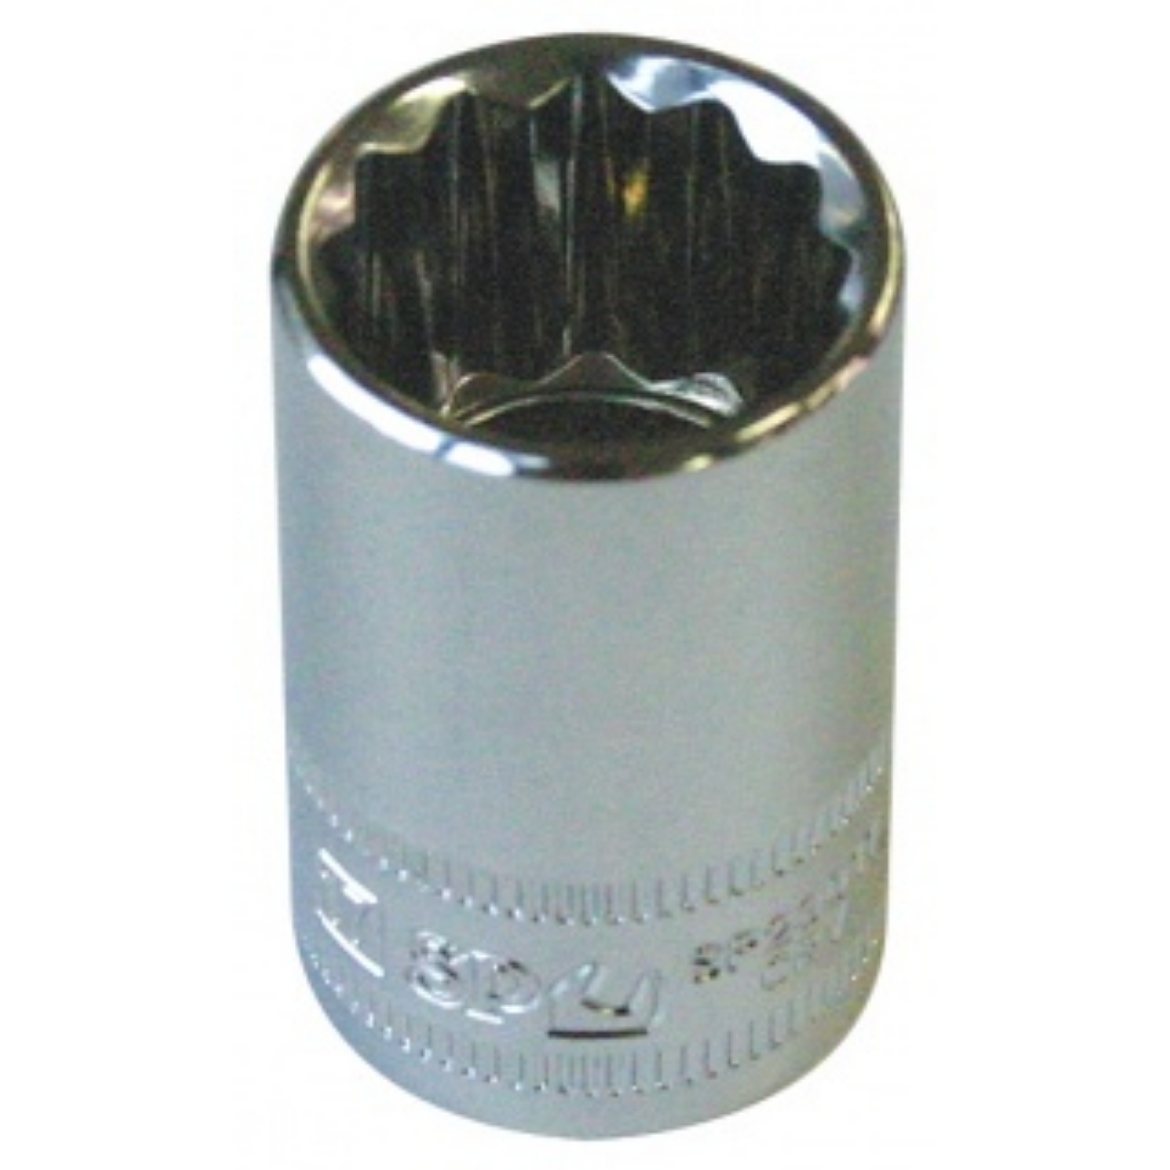 Picture of SOCKET 1/2"DR 12PT METRIC 27MM SP TOOLS